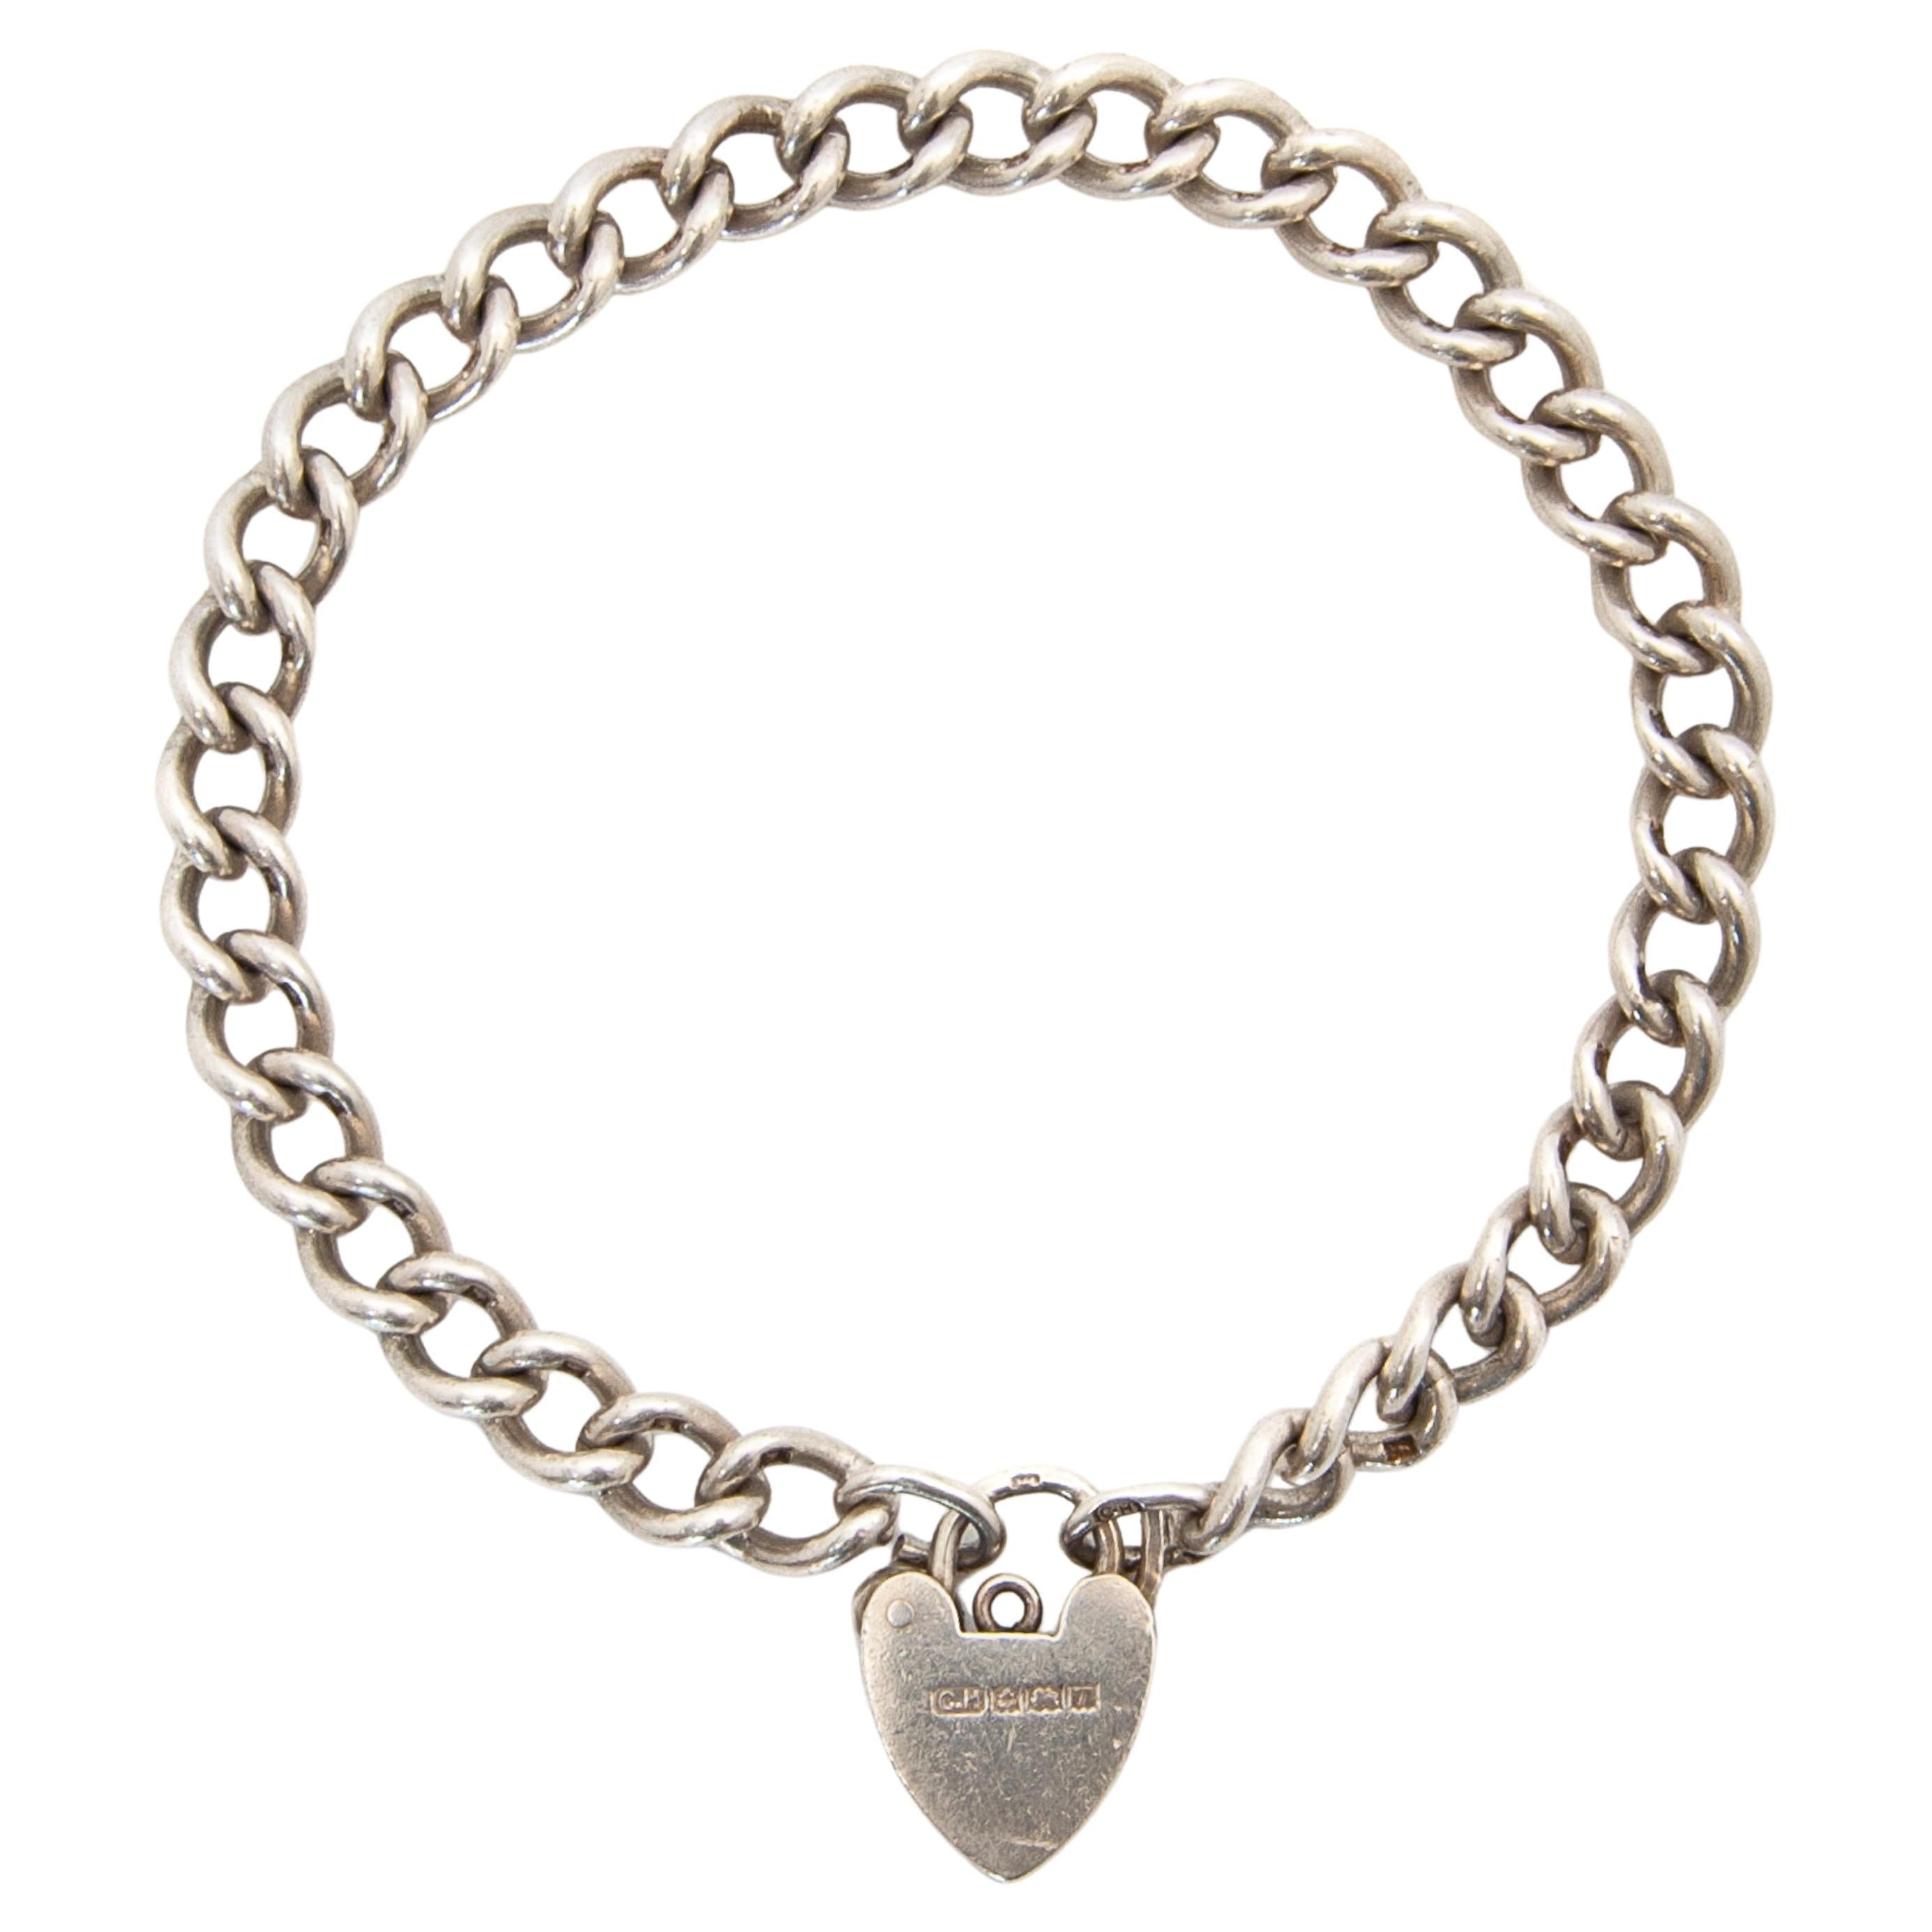 This is a beautifully crafted, high quality Charles Horner (1837–1896) sterling silver curb chain charm bracelet with a heart padlock clasp. The bracelet links are stamped with a lion passant for sterling silver and stamped on the end rings and